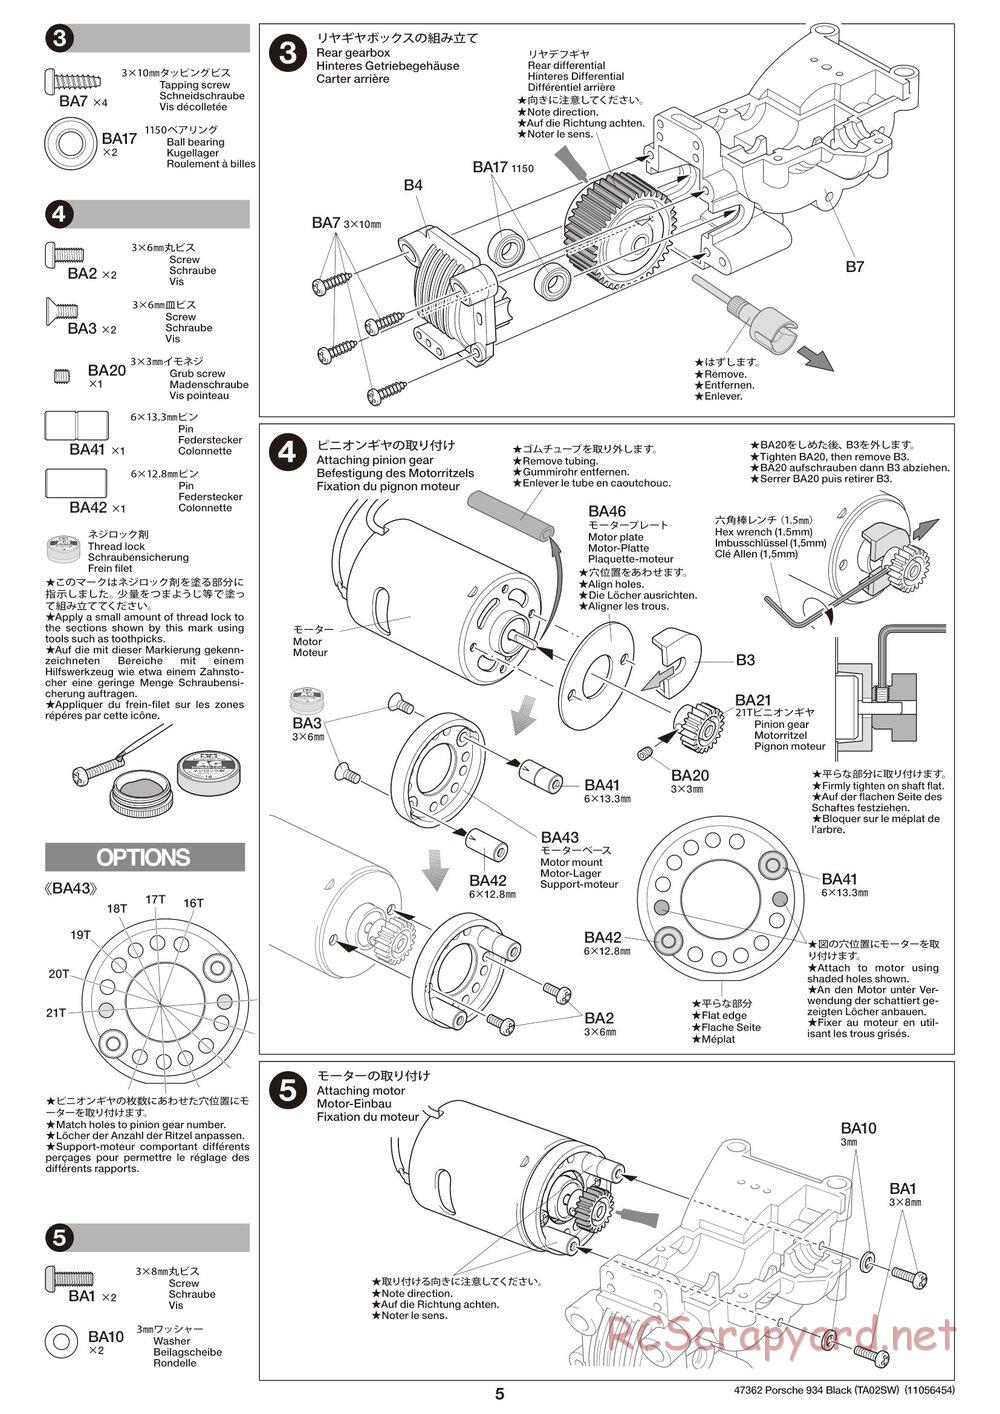 Tamiya - TT-02 White Special Chassis - Manual - Page 5